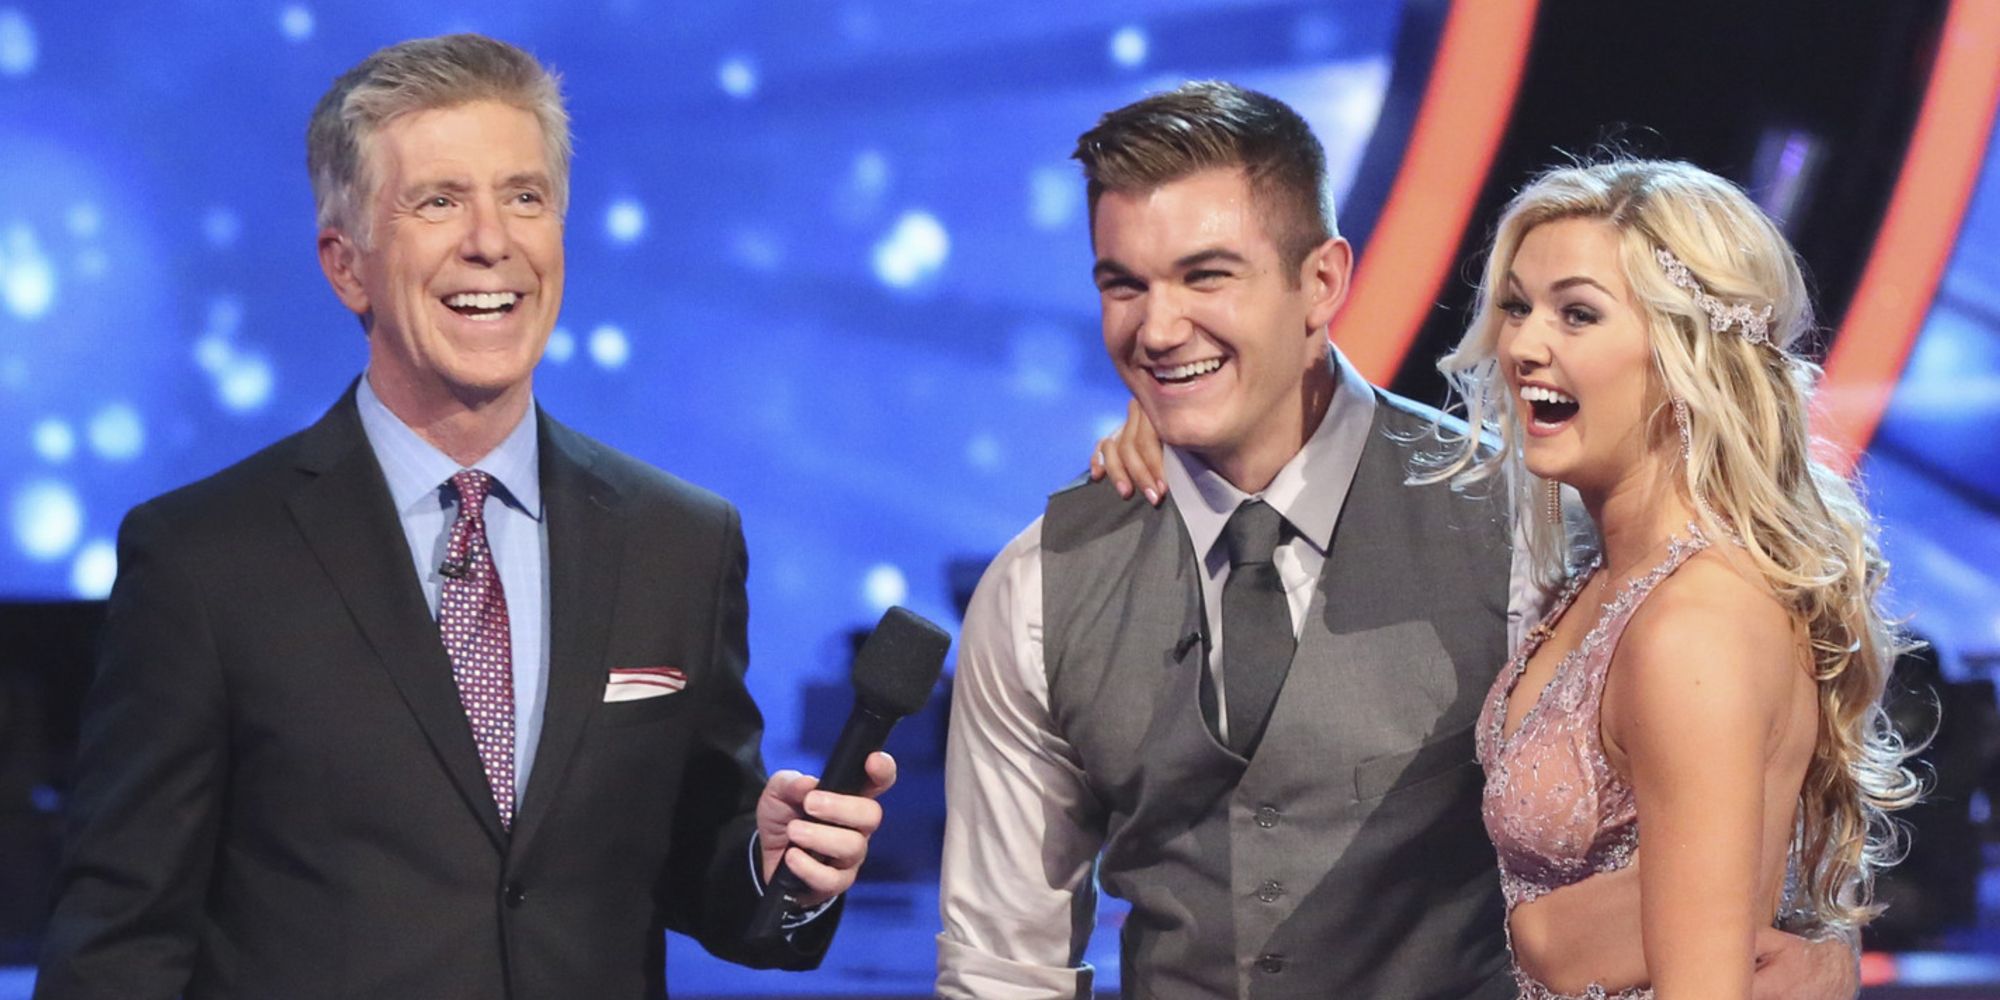 Dancing With The Stars: Who Is Alek Skarlatos From Season 21